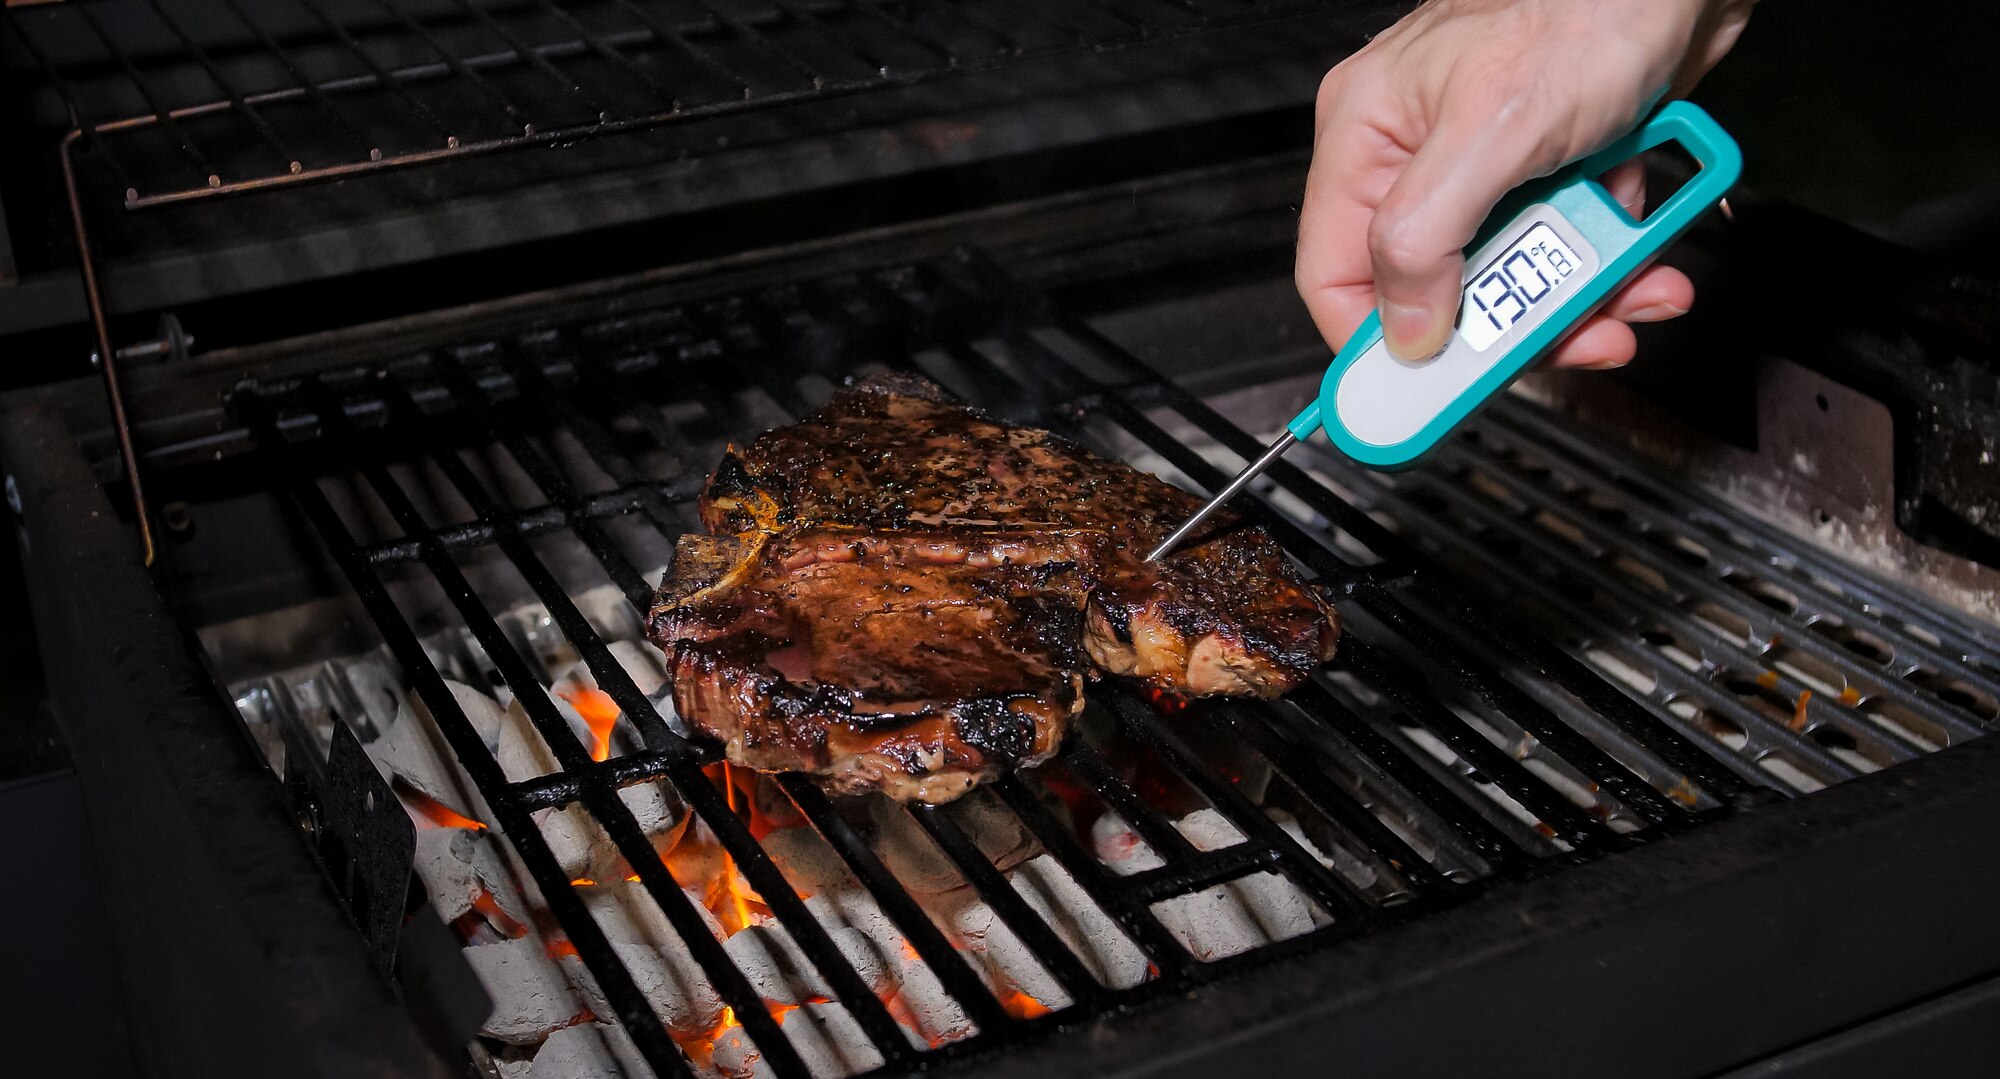 Photo of meat on a grill with a hand checking the temperature using a thermometer.